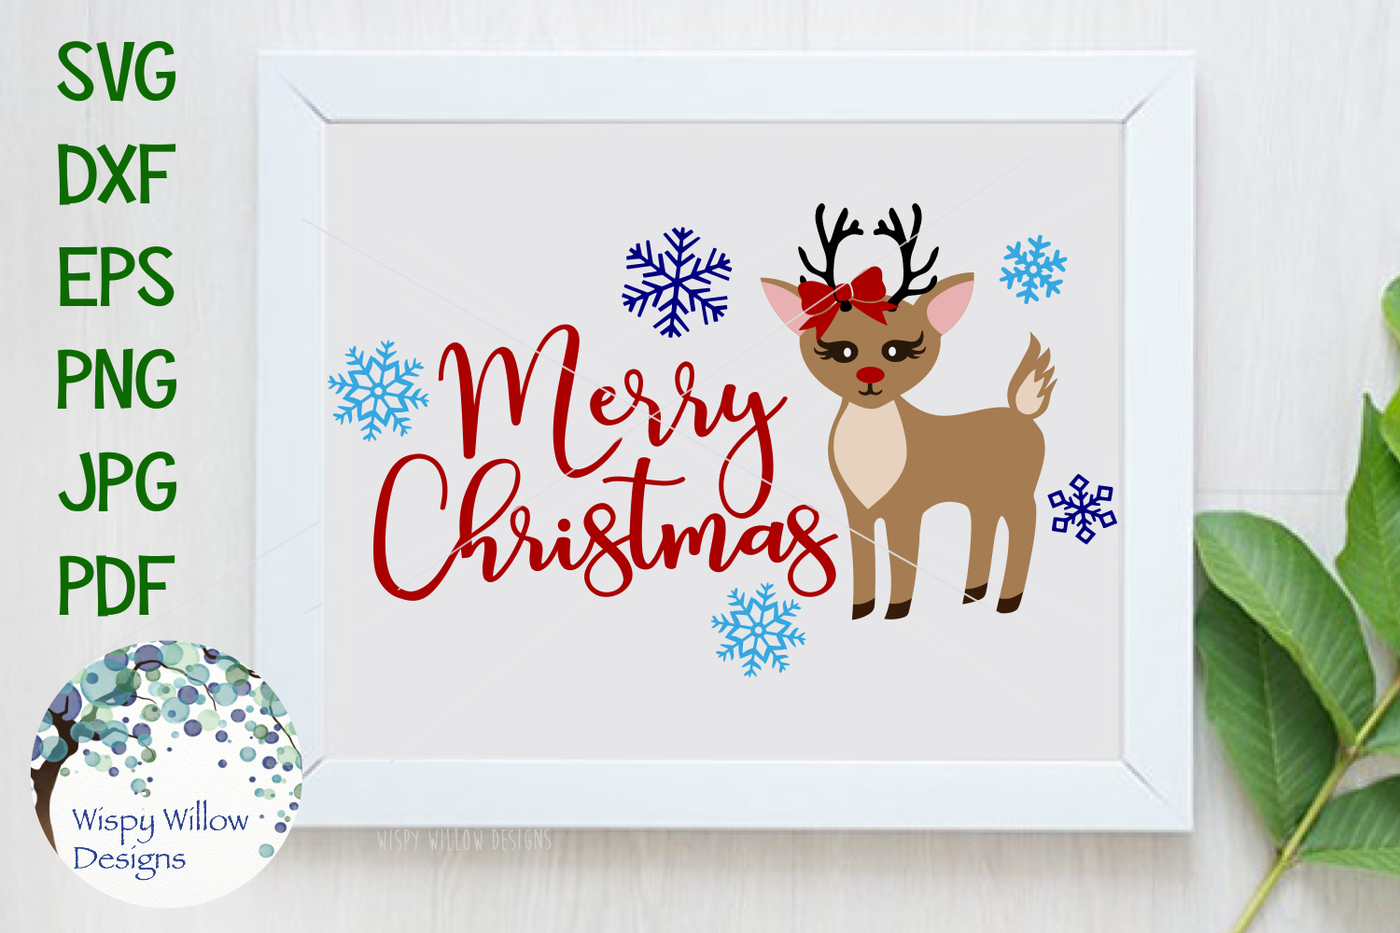 Merry Christmas Reindeer Holiday Rudolph Svg Dxf Eps Png Jpg Pdf By Wispy Willow Designs Thehungryjpeg Com